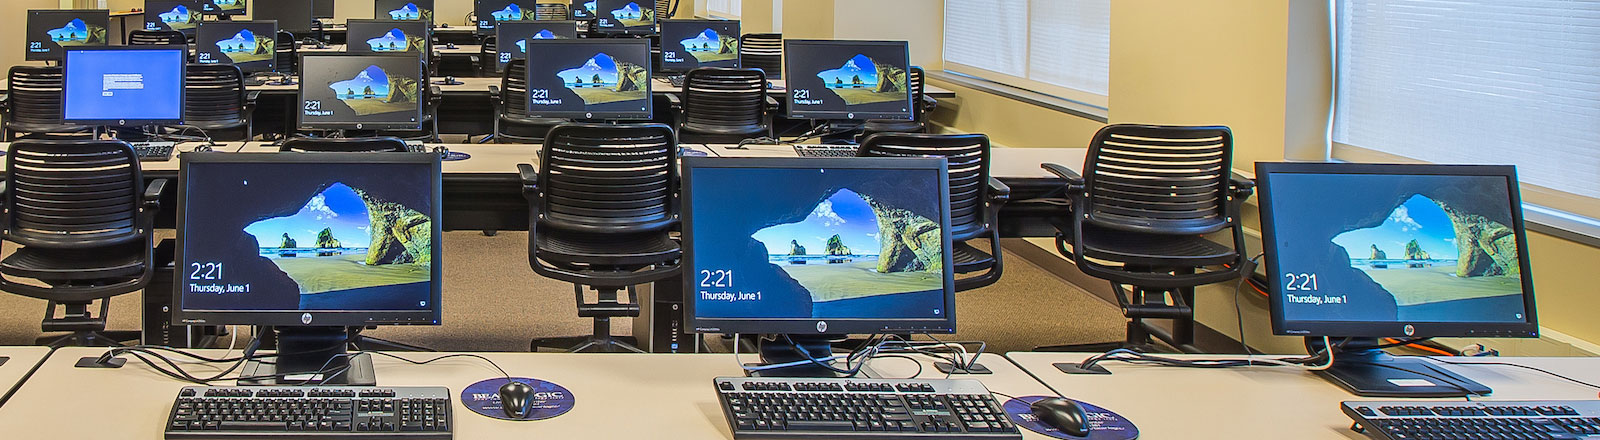 Photo of multiple workstations in a computer lab